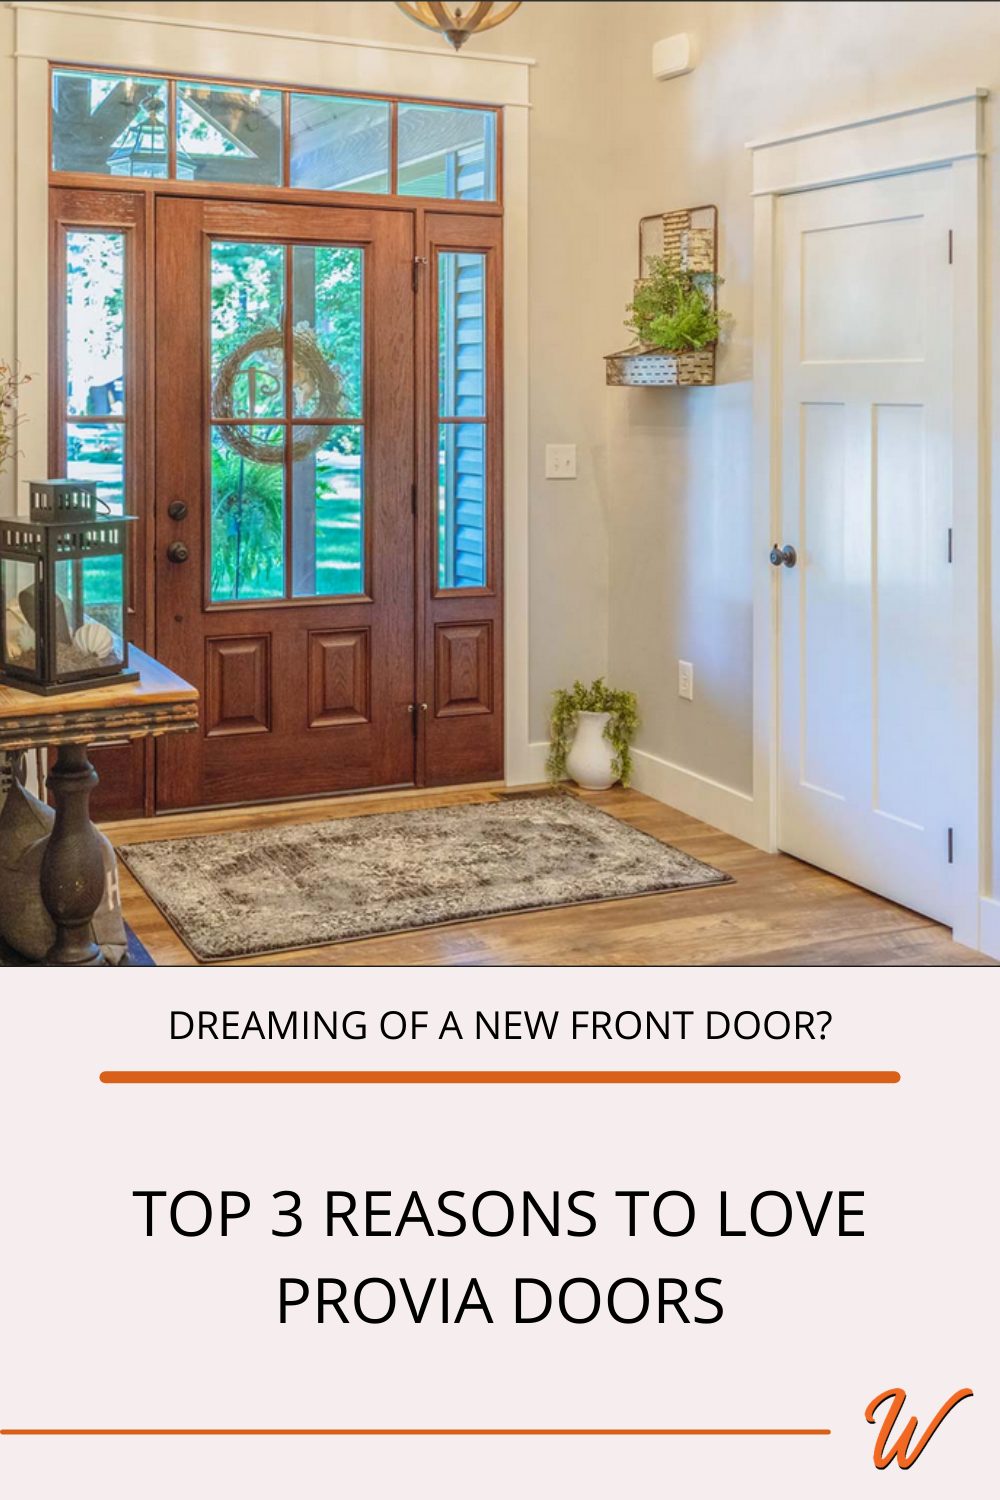 Entry foyer with a wood grain fiberglass front door captioned with: Dreaming of a new front door? Top 3 reasons to love ProVia doors